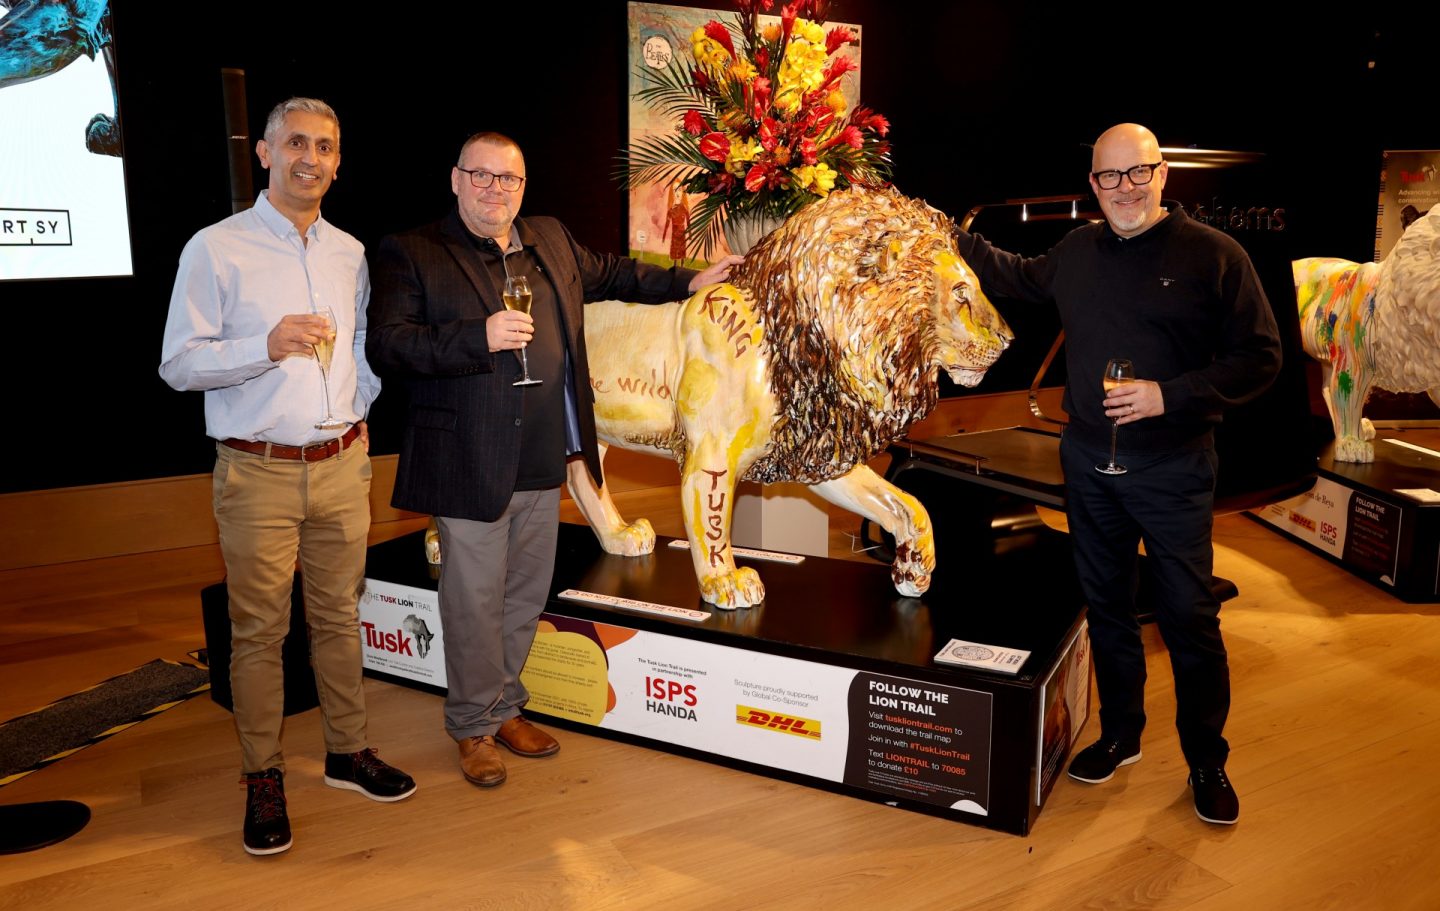 DHL Team - Global Lead Partner for the Tusk Lion Trail (Photo by Chris Jackson/Getty Images for Tusk Trust)